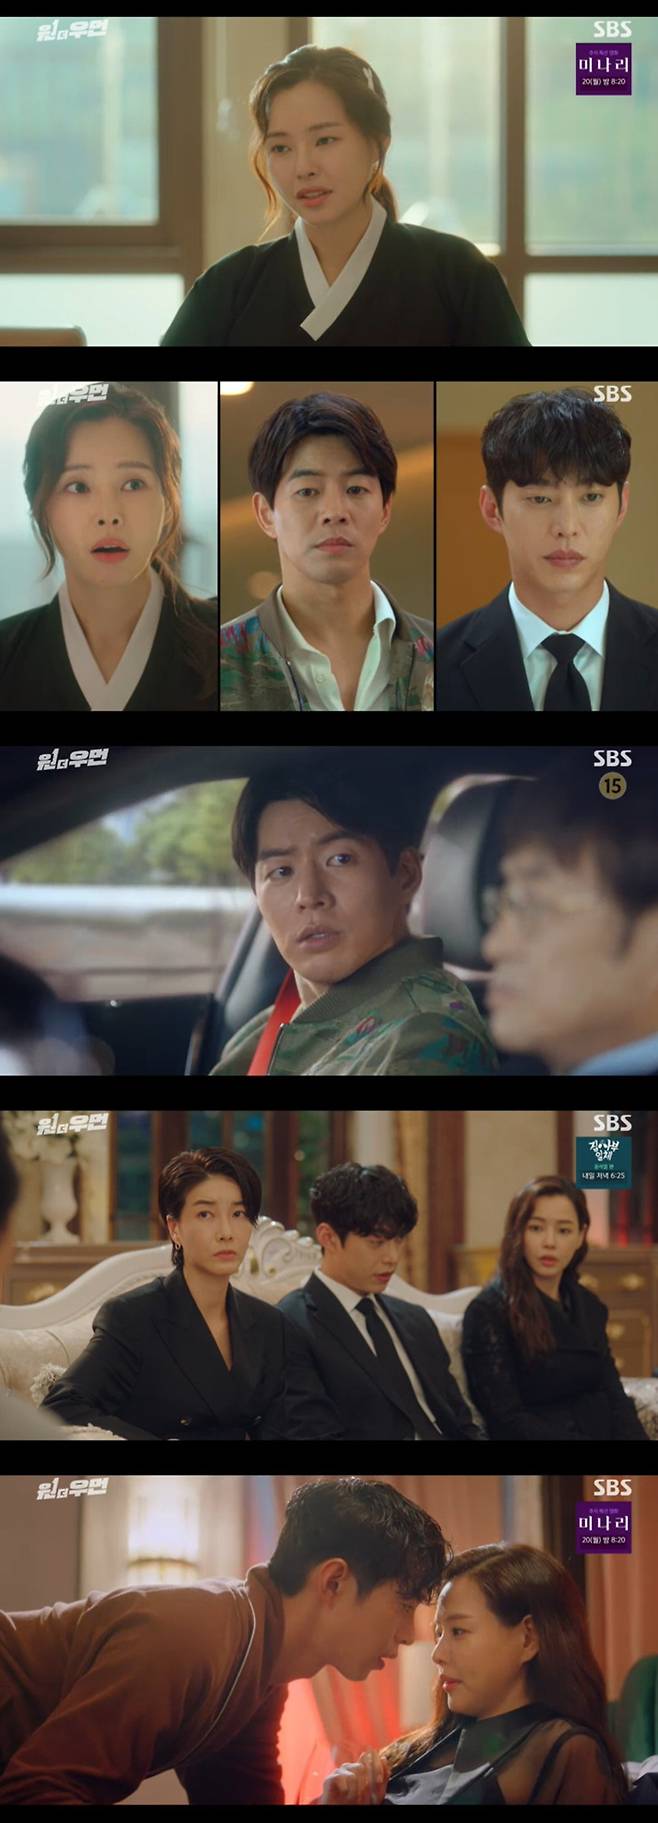 Wonder Woman Lee Sang-yoon begins to suspect Lee Ha-nuiIn the SBS gilt drama Wonder Woman broadcast on the 18th, it included the appearance of a supporting actor (Lee Ha-nui) who became Hanju Group daughter-in-law and Yuko Fueki Group heiress Kang Mina (Lee Ha-nui).In front of the supporting actor who opened his eyes in the hospital room, there was a signatories (Na Young-hee). The signatories tried to slap the supporting actor with a slap, and the supporting actor grabbed the signatories arms, saying, What is this lady?The doctor diagnosed that the supporting actor had retrograde amnesia, and the Hanju group decided to refrain from the supporting actors external activities so that the supporting actors condition was not rumored.When he realized that he became a daughter-in-law of the Hanju group, he was satisfied that he had not only a chaebol but also a handsome husband, han seung-wook (Song Won-seok).han seung-wook even banned Cho Yeon-ju from talking to people he doesnt know about to hide what hes suffering from amnesia and even banned from going out alone.Han Sung-hye (Jin Seo-yeon) made a meaningful look at the appearance of a different supporting actor.Han seung-wook (Lee Sang-yoon) who came to Korea also visited The Funeral to see Kang Mina.Han seung-wook drew the line, saying, Today is a humanitarian tribute, someone who should meet anyway, but no one seemed to have any doubt.The supporting actor, who felt strange in The Funeral chapter, searched about Kang Mina and felt sorry for Kang Minas life.Han seung-wook encountered a supporting actor in The Funeral, but the supporting actor who ate peanut cookies did not recognize Han seung-wook.Cho Yeon-ju felt a strange feeling when she found out that Han seung-wook was the only one who asked if she was okay.Han seung-wook, who thought Kang Mina was strange, found out that Kang Mina was in a traffic accident.Back home, the supporting actor received Kang Minas weekly schedule; Kang Minas weekly schedule was only housework.Especially in the Hanju group, most of the housework was the part of the supporting actor because the maid was kicked out to avoid the condition of Kang Mina.Cho Yeon-ju was astonished at the life of Kang Mina, who was different from his ideas.Cho Yeon-ju was surprised at herself by being fluent in English, French, and Vietnamese.Cho Yeon-ju learned that a week of people from Vietnam bullied Kang Mina through maids.In the meantime, the people who had been out of Kang Mina in foreign languages ​​were embarrassed by the change of Kang Mina, who was fluent in English and French.One week people planned to keep Kang Mina only until he got Yuko Fuekis property, and Cho Yeon-ju learned of it.It was a long-looking man who saved the supporting actor who secretly listened to the stories of one week people.Han Seung-wook asked the supporting actor, Do not you know me? And the supporting actor lost his memory and confessed his heart.But the supporting actor was different from Kang Mina, who was angry at her nephew during the memorial service and was angry at the people who stopped her.The supporting actor shouted, Everyone knows who I am, who am I?Han seung-wook, who saw this, added suspicion to the fact that Kang Minas scar was missing. Han seung-wook went to the supporting actor and said, What are you?Where is the real Mina? he asked.